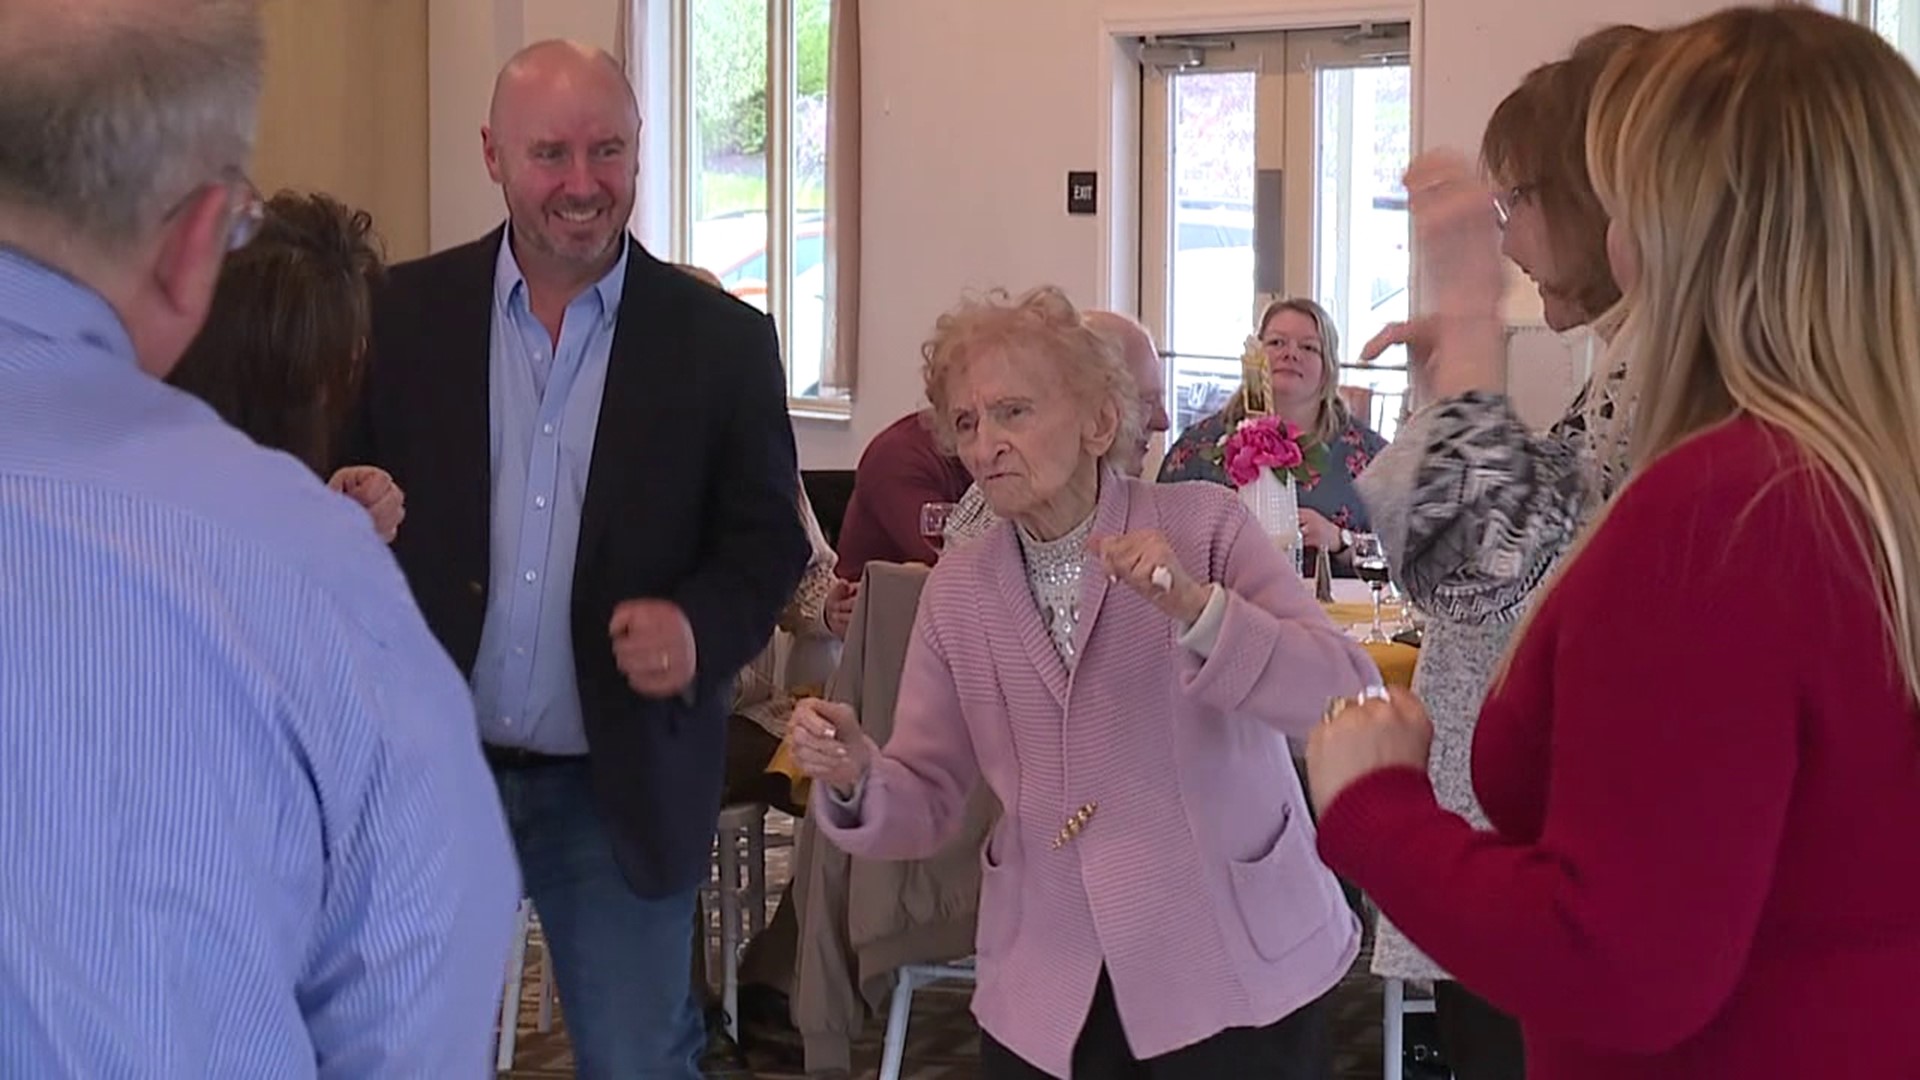 One woman celebrated a milestone birthday in Archbald on Saturday.